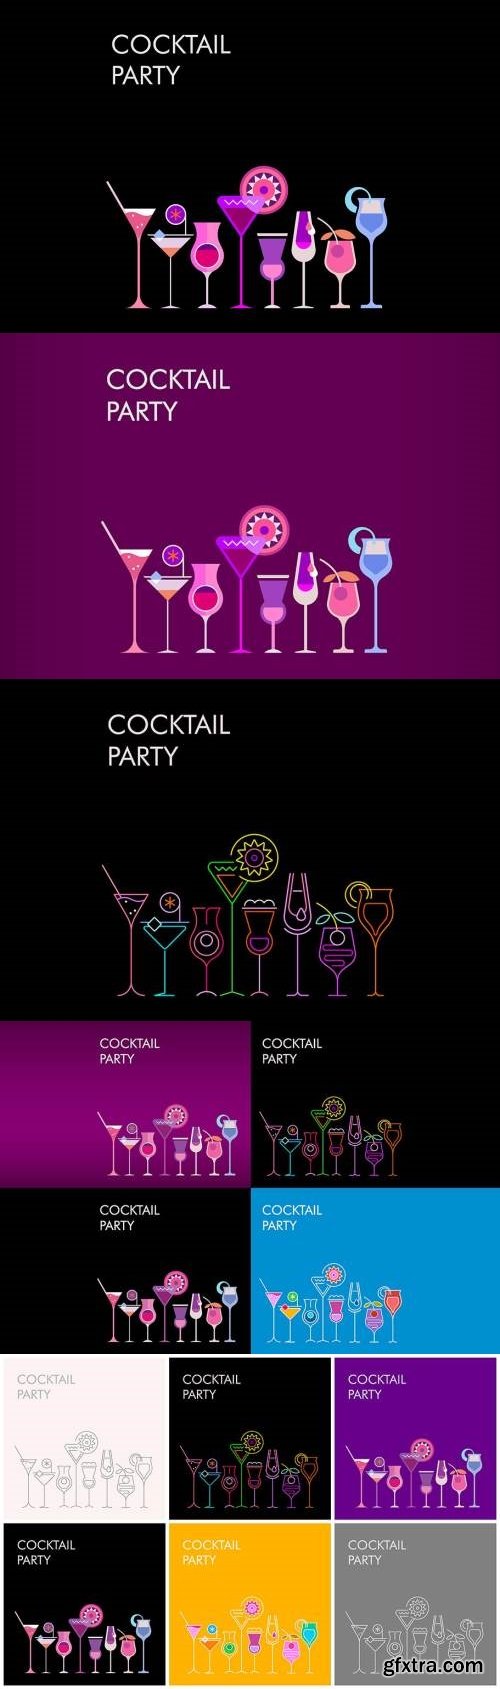 Cocktail Party vector banner designs (large set)